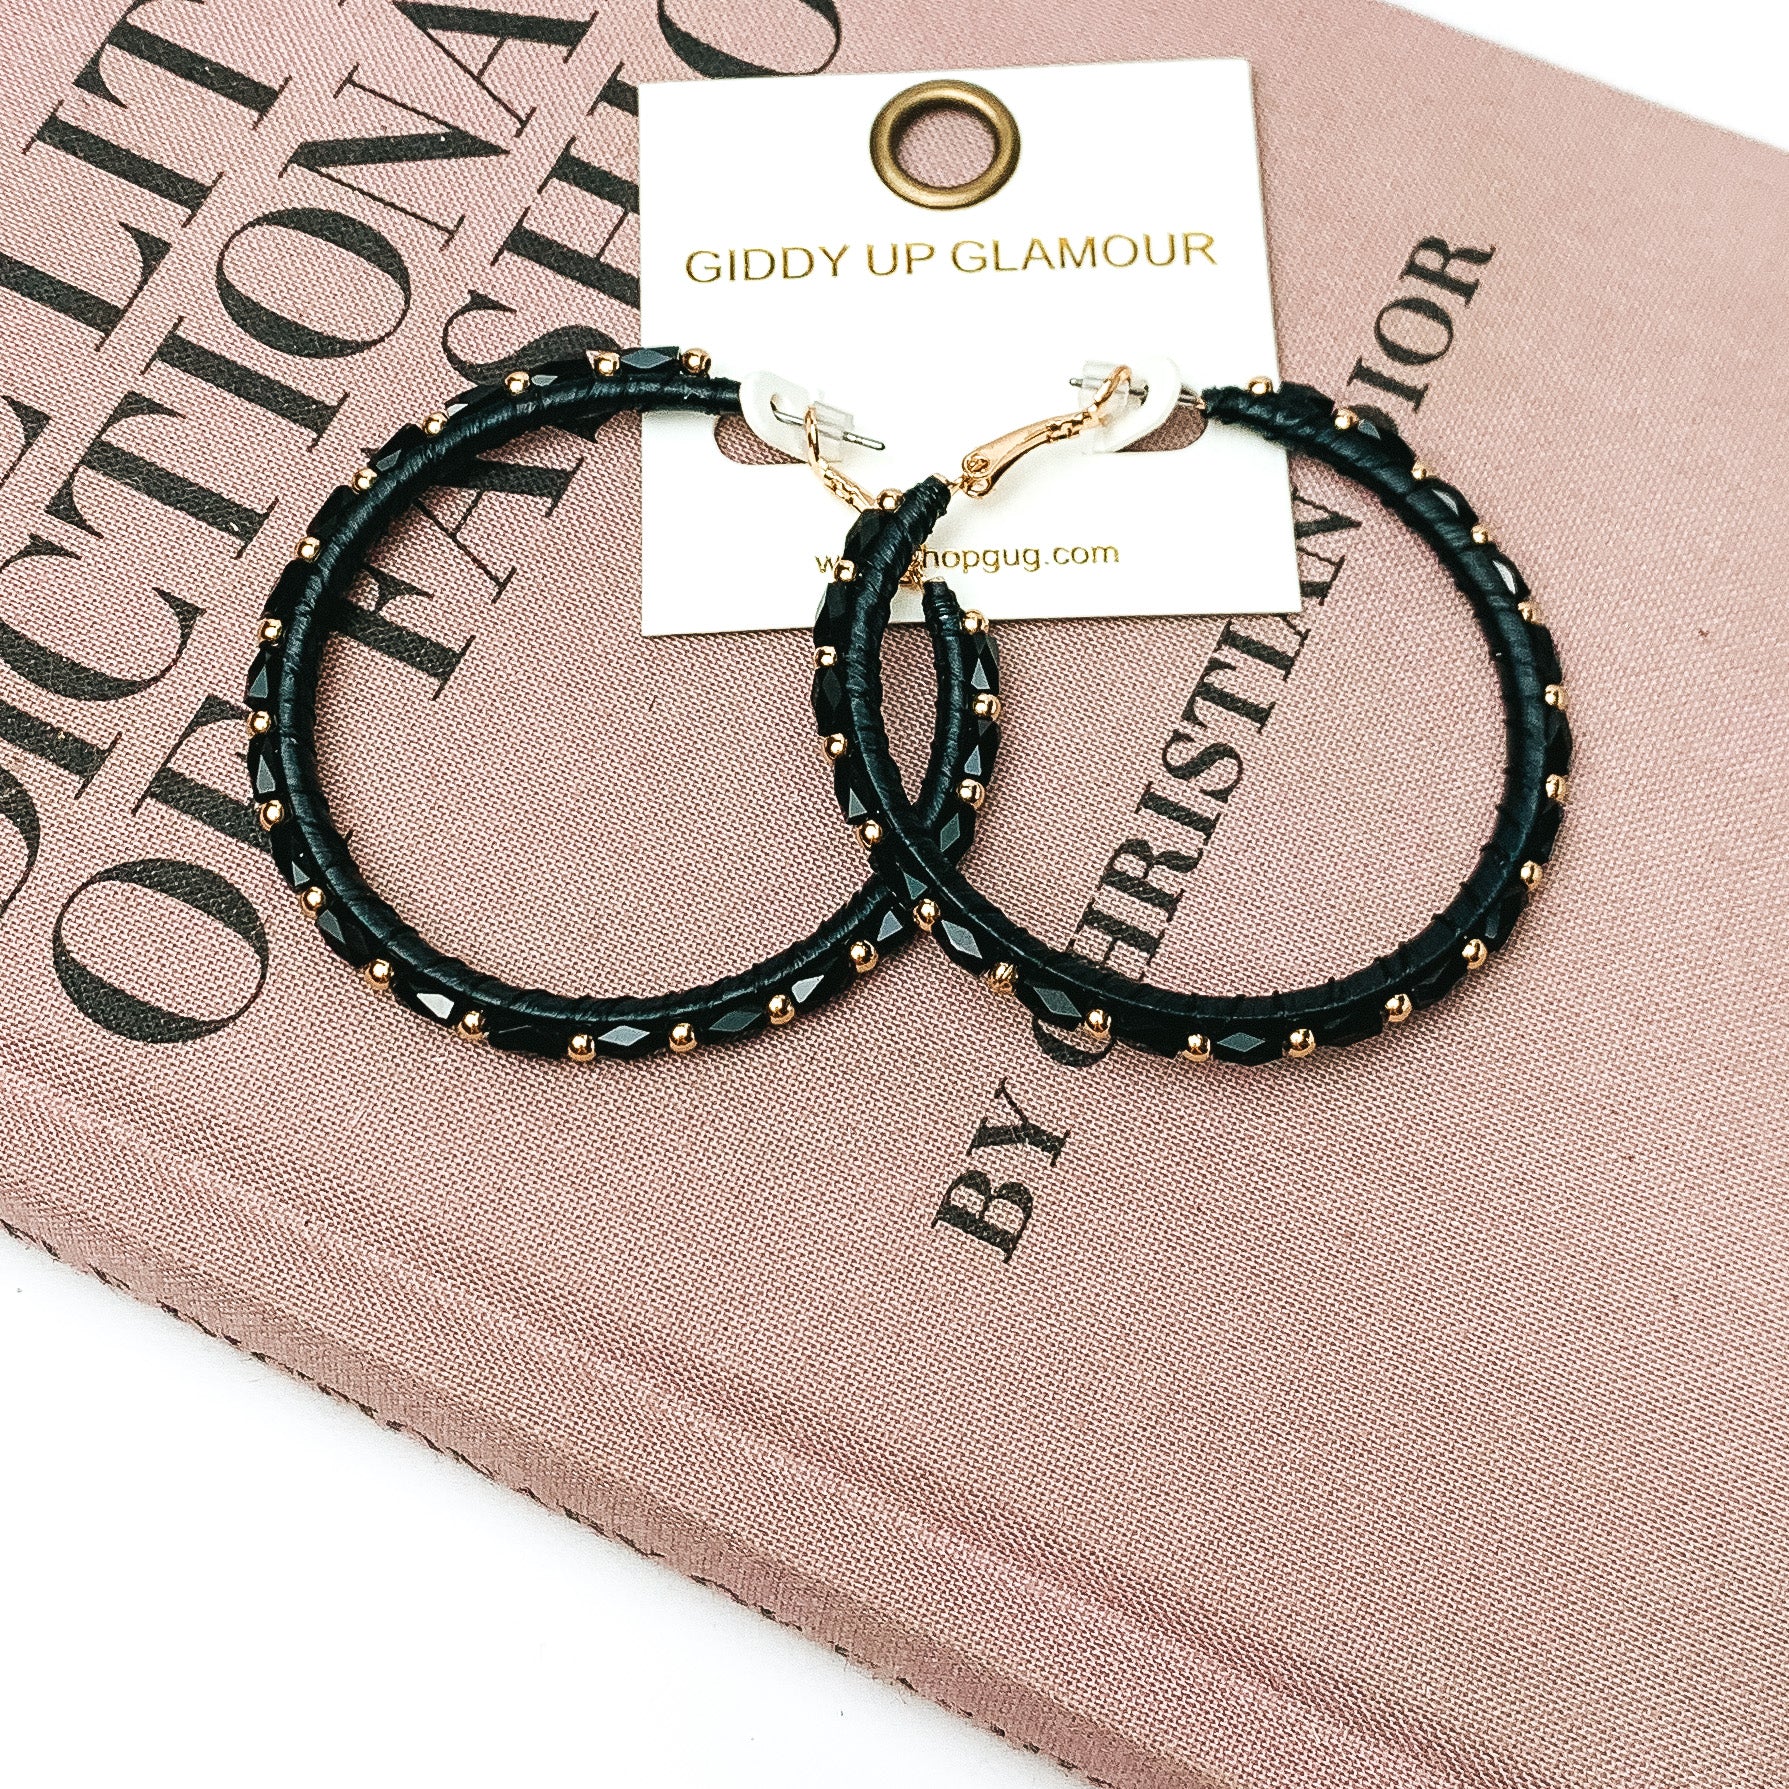 Pictured are circle beaded hoop earrings with gold spacers in black. They are pictured with a pink fashion journal on a white background